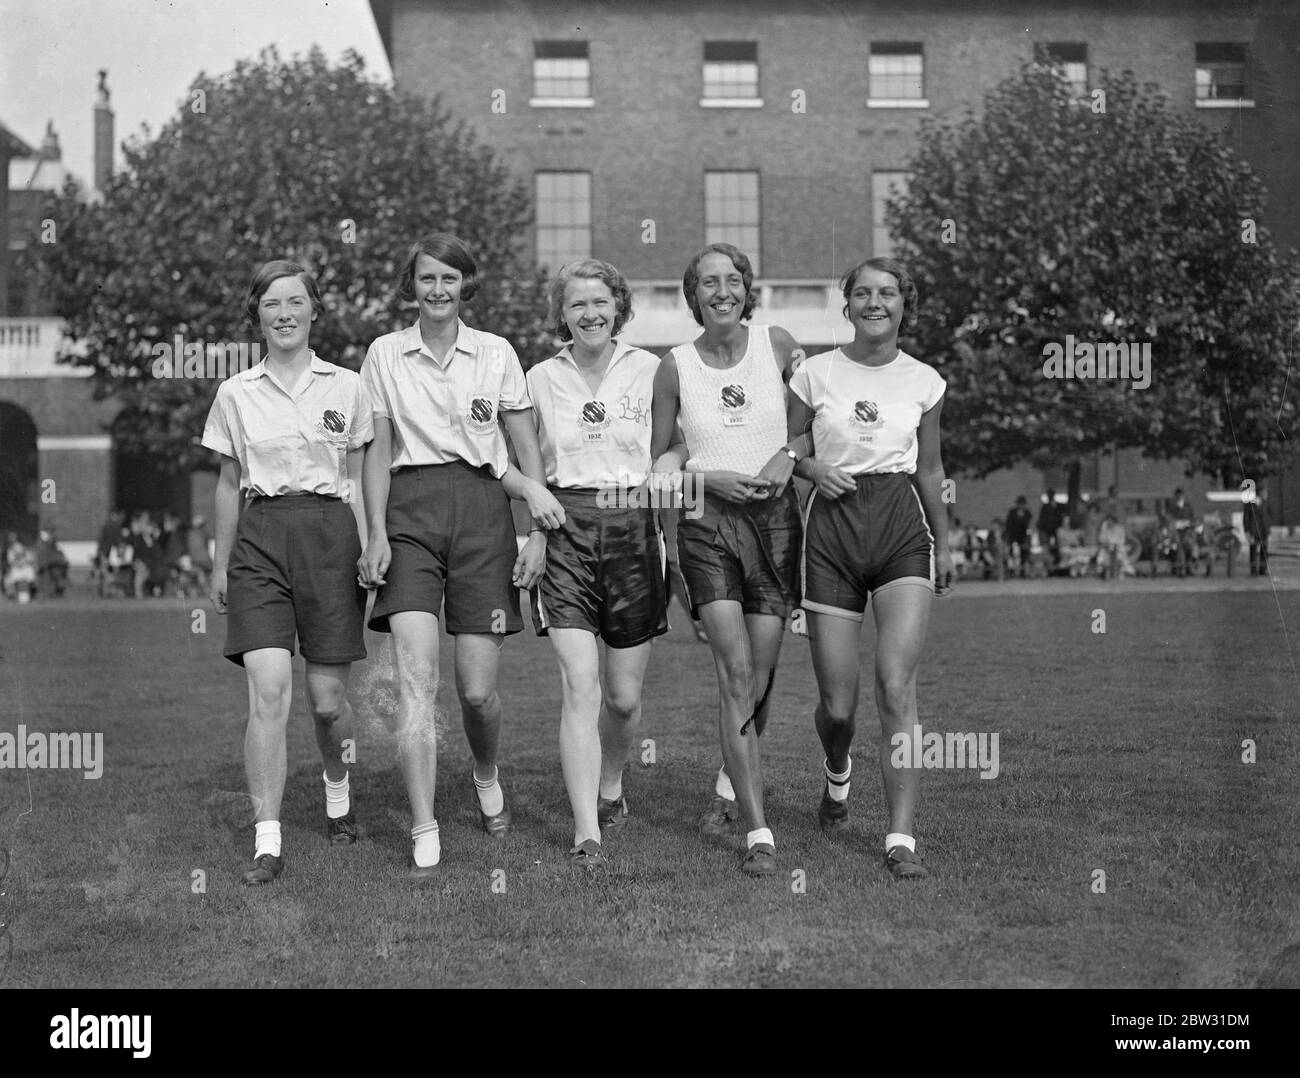 Women 's inter county championships open at Duke of York 's Headquarters . The first annual inter county women 's sports meeting took place at the Duke of York 's Headquarters , Chelsea , London . The first team the Bedford County have ever had at the meeting . Second from right is Miss Joan Webster , sister of the English Junior Pole Vault jumper . 17 September 1932 Stock Photo